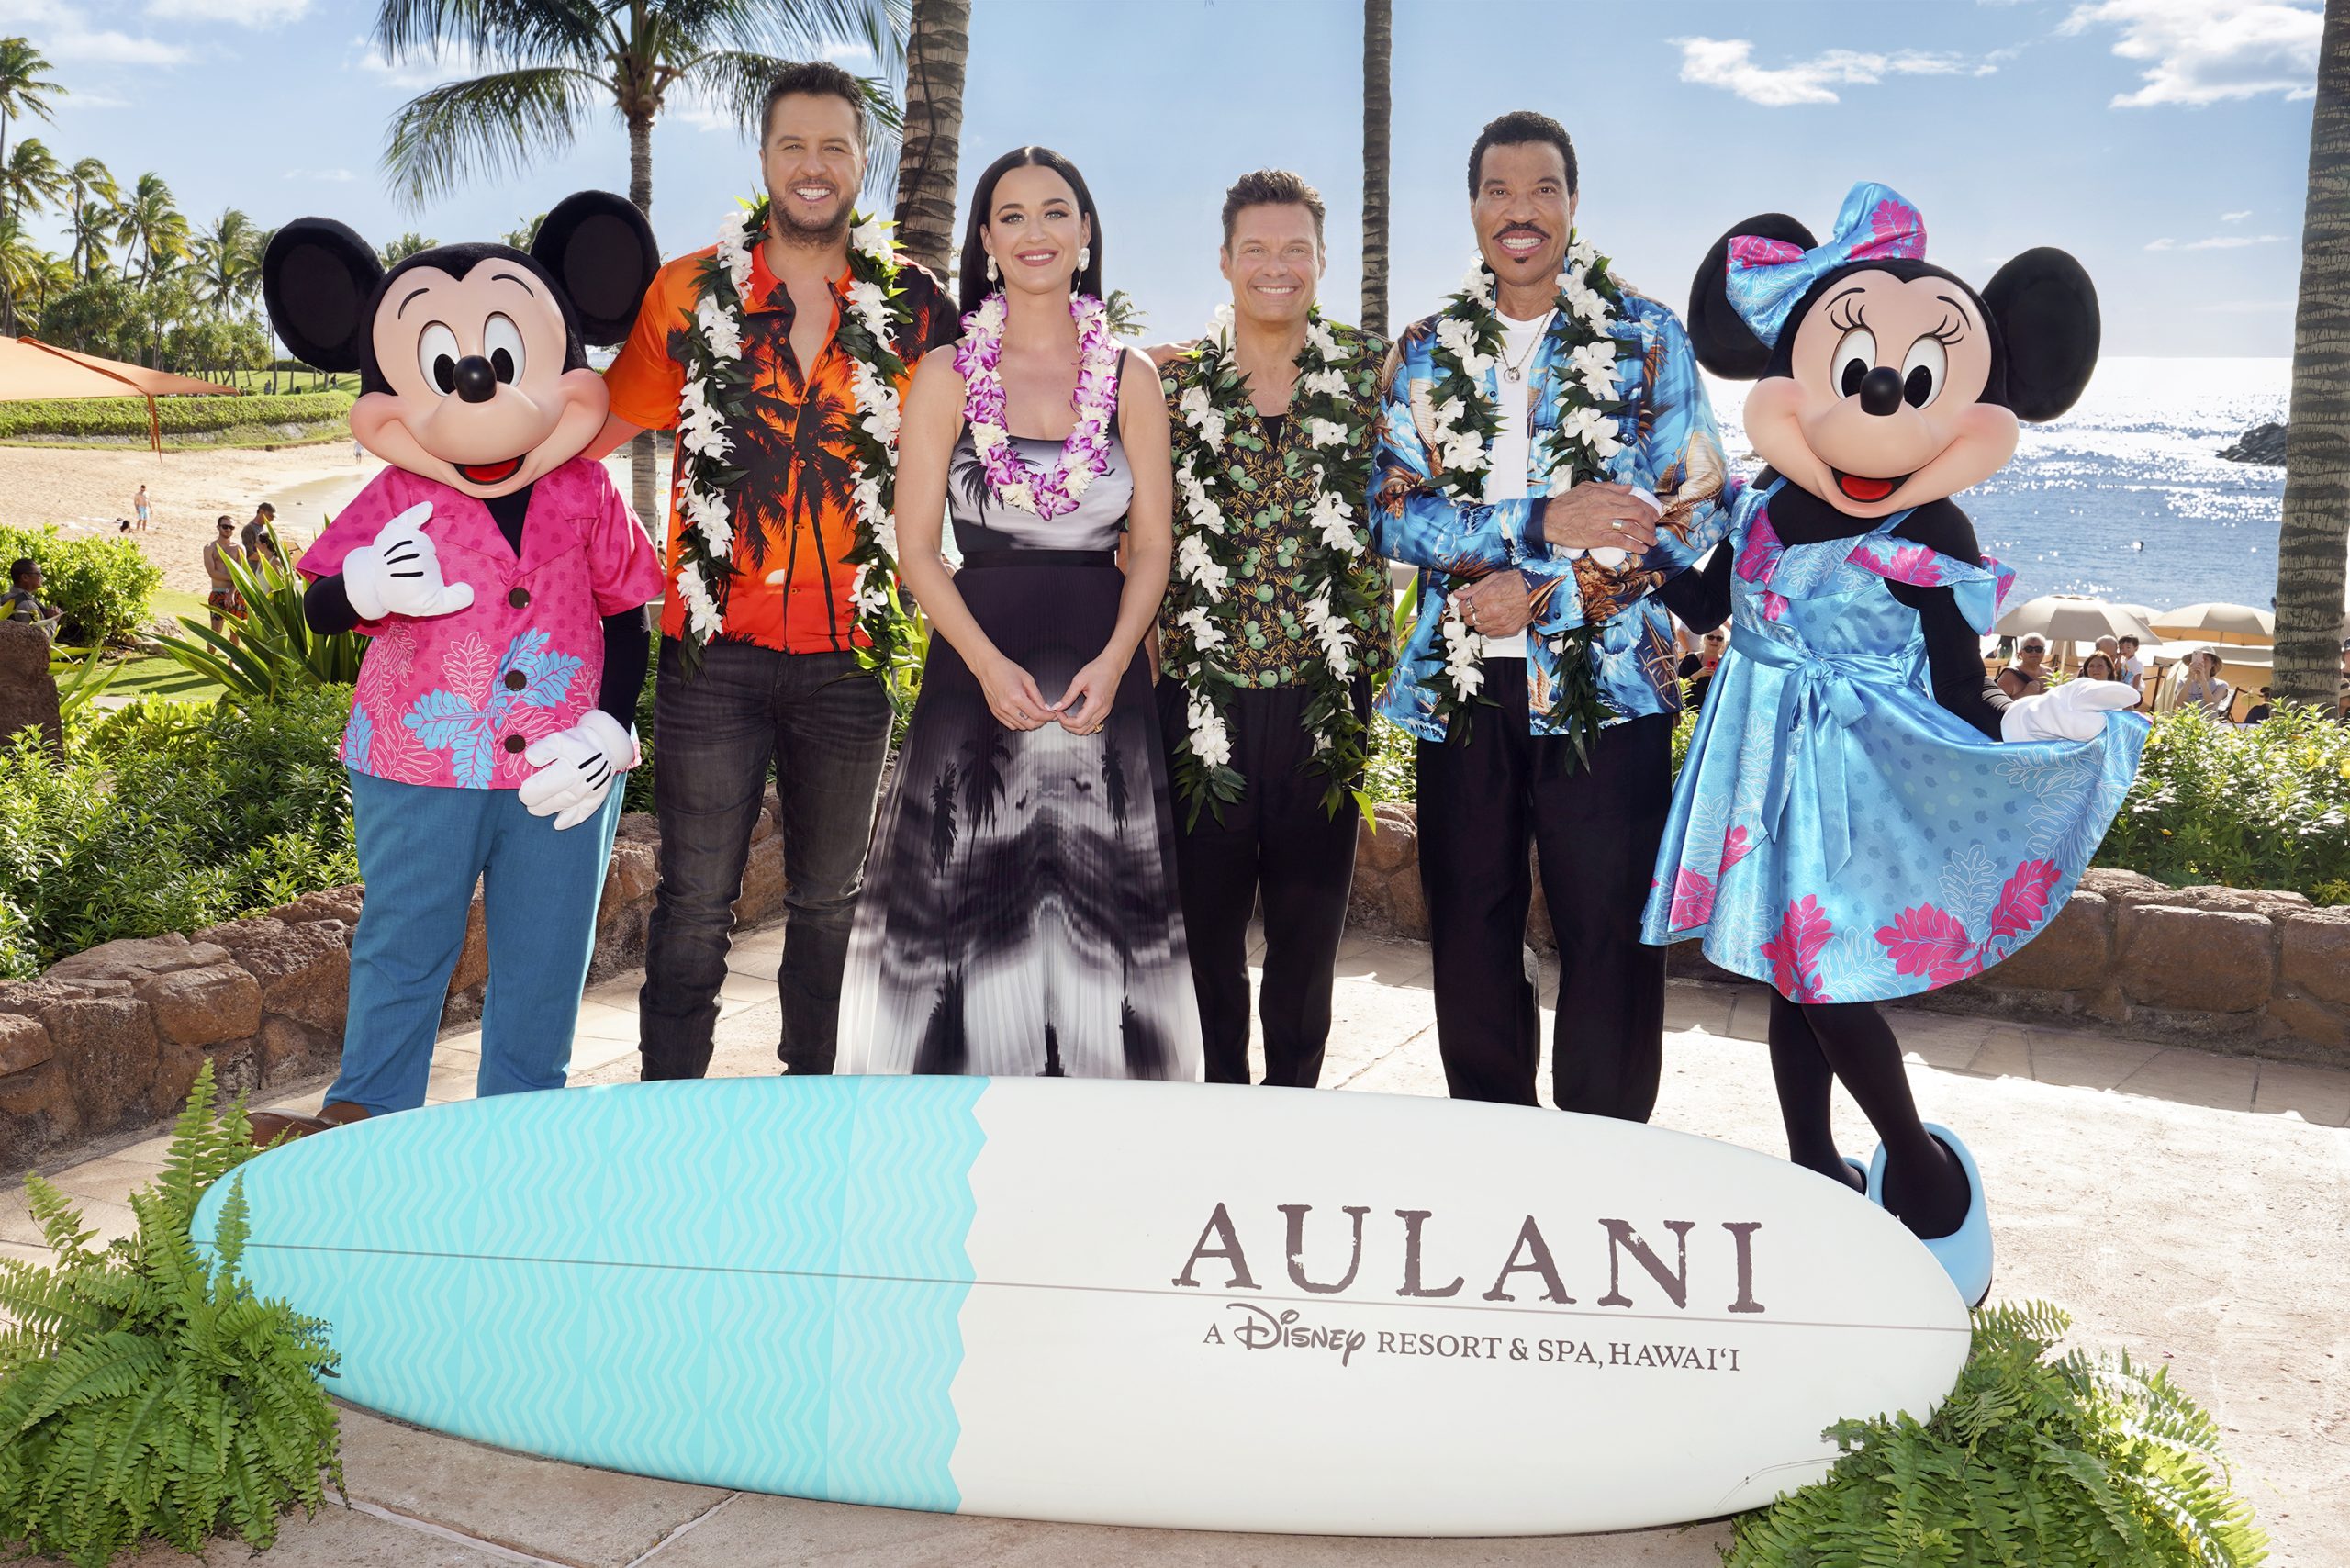 MIKEY MOUSE, LUKE BRYAN, KATY PERRY, RYAN SEACREST, LIONEL RICHIE, MINNIE MOUSE on American Idol